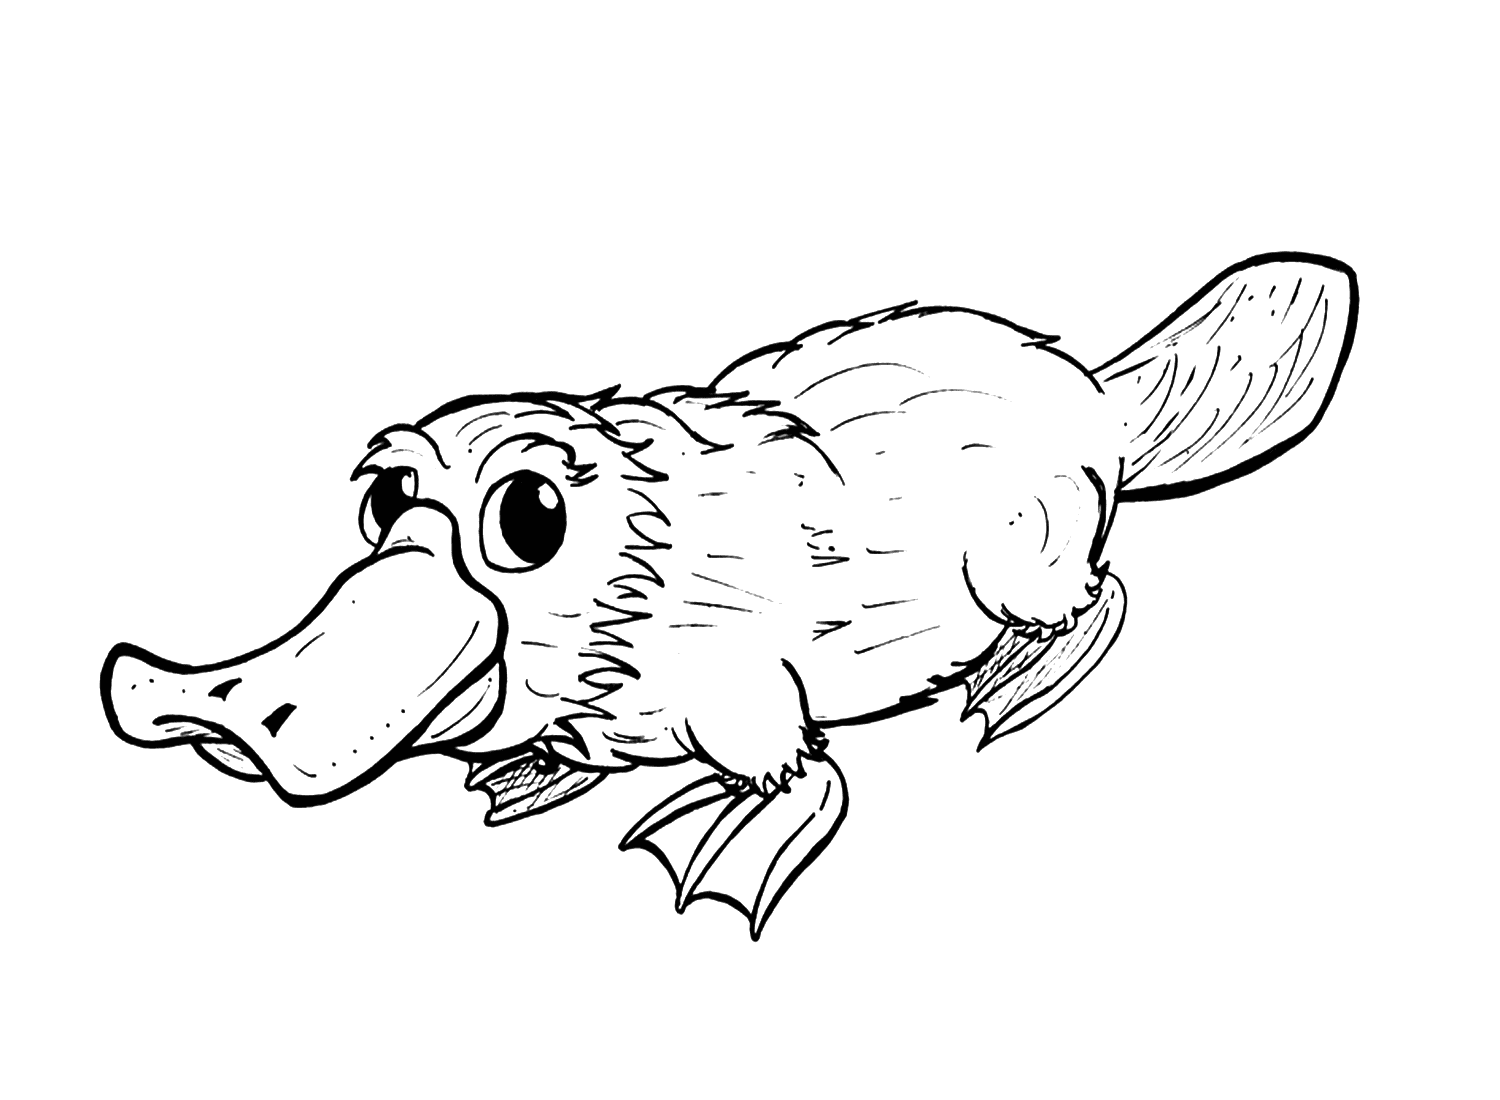 Realistic Platypus from Platypus